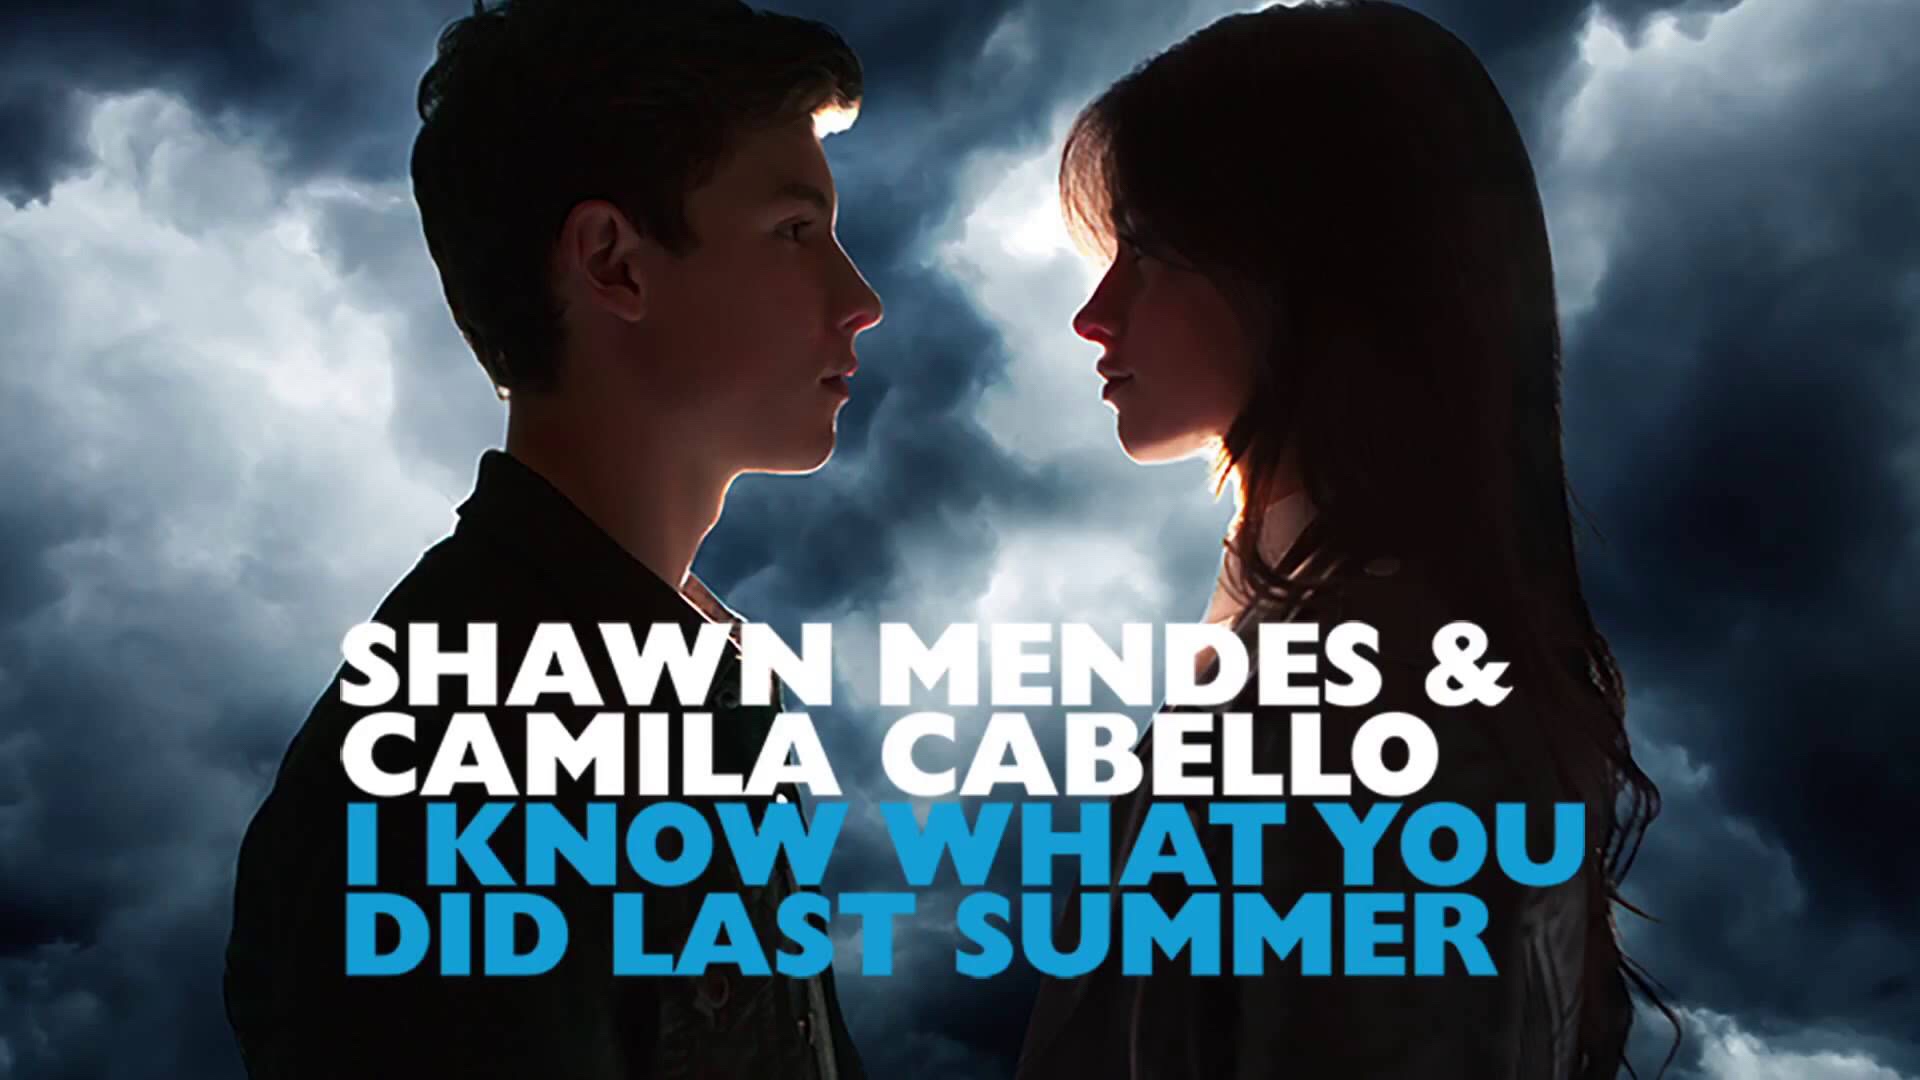 What did the do last year. Camila Cabello last Summer. Shawn Mendes & Camila Cabello - i know what you did last Summer. I know what you did last Summer песня. I know what you did.